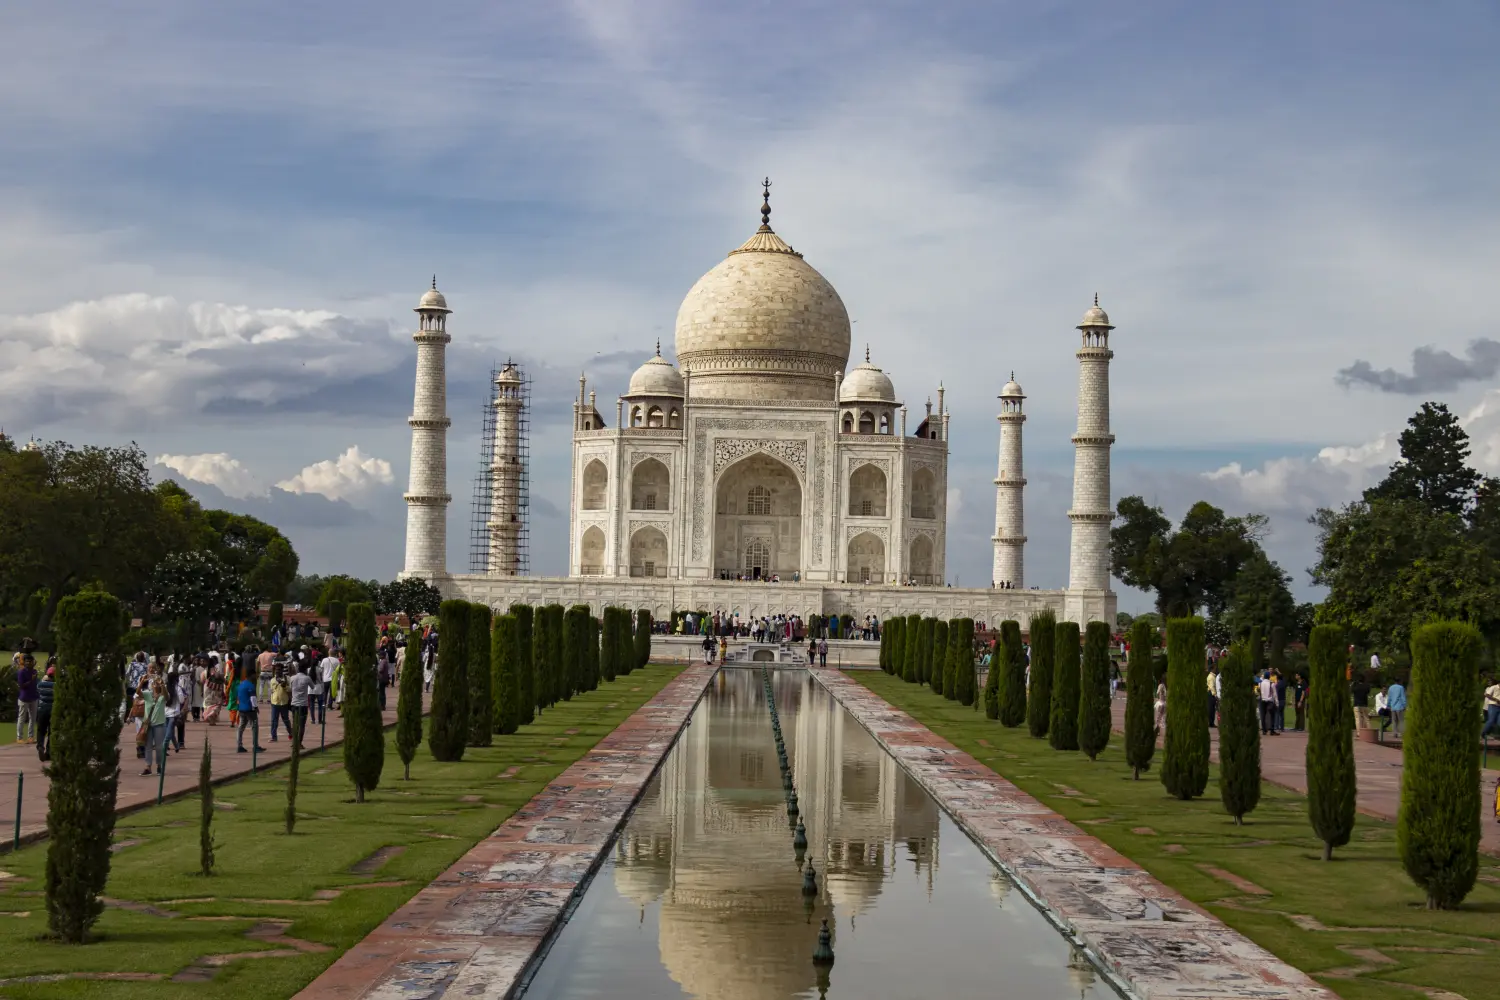 The Taj Mahal was commissioned by Shah Jahan in 1631, to be built in the memory of his wife Mumtaz Mahal,